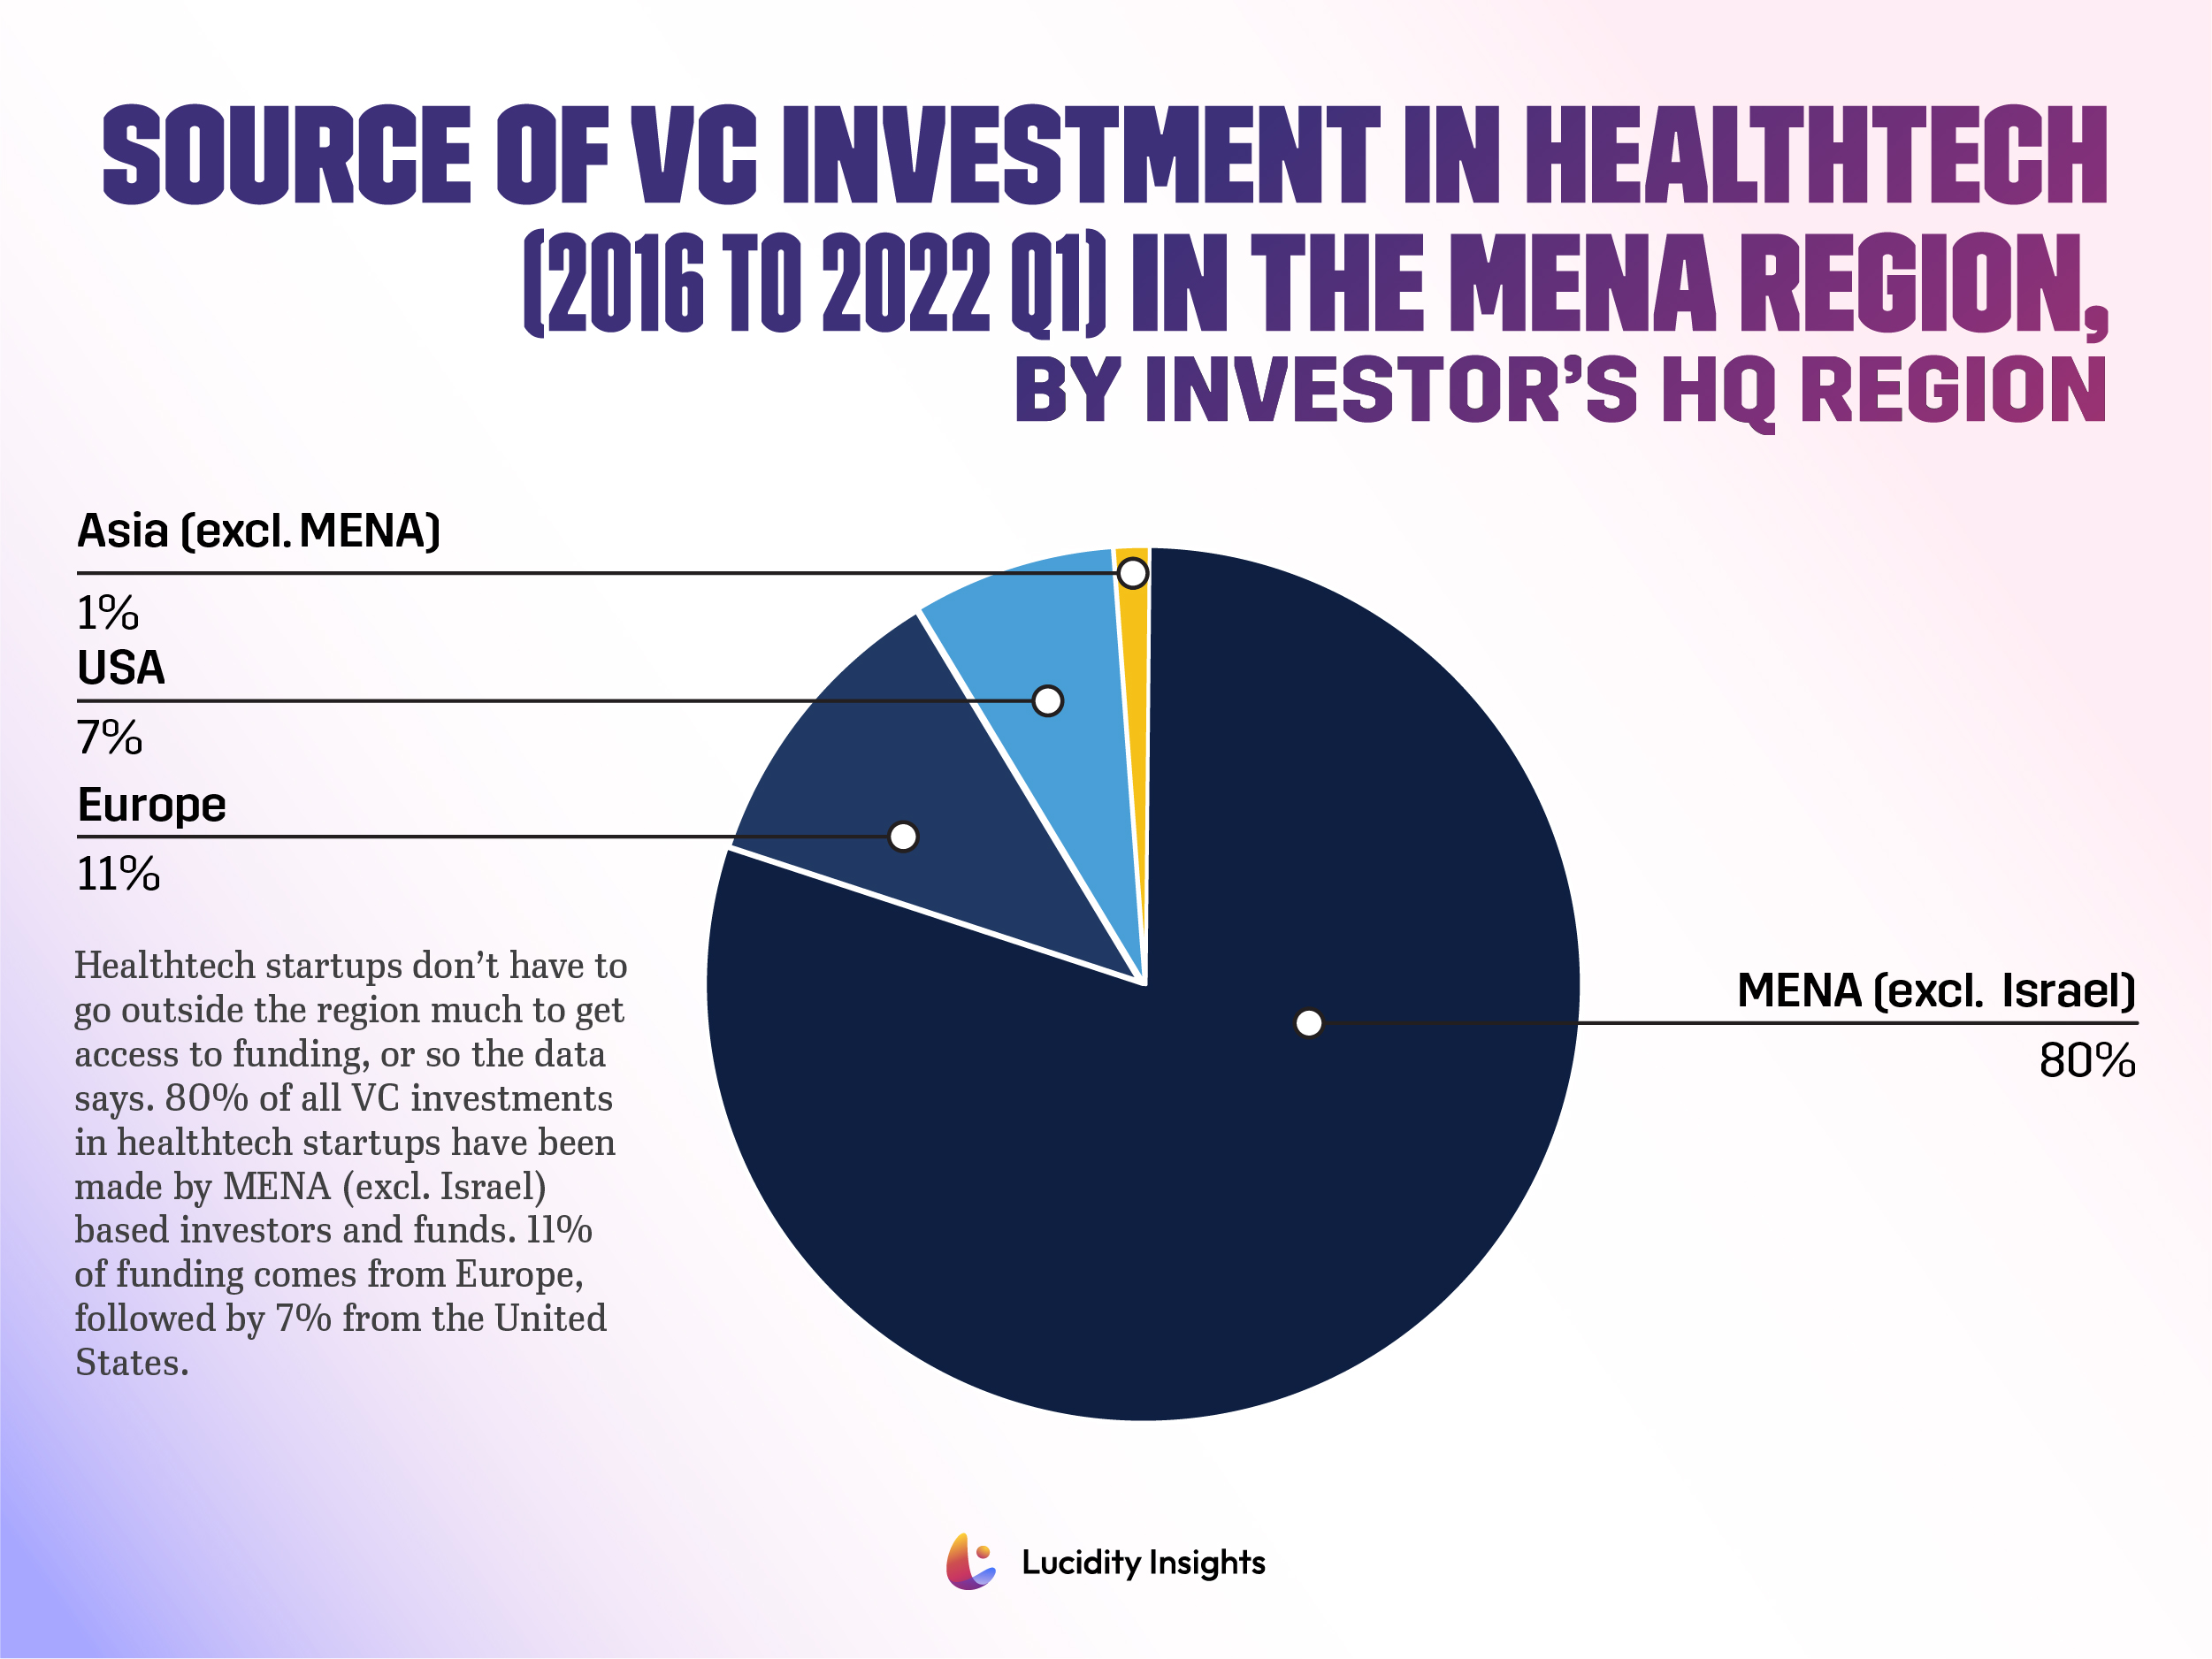 Source of VC Investment in Healthtech Startups in the MENA Region (2016 to 2022 Q1)